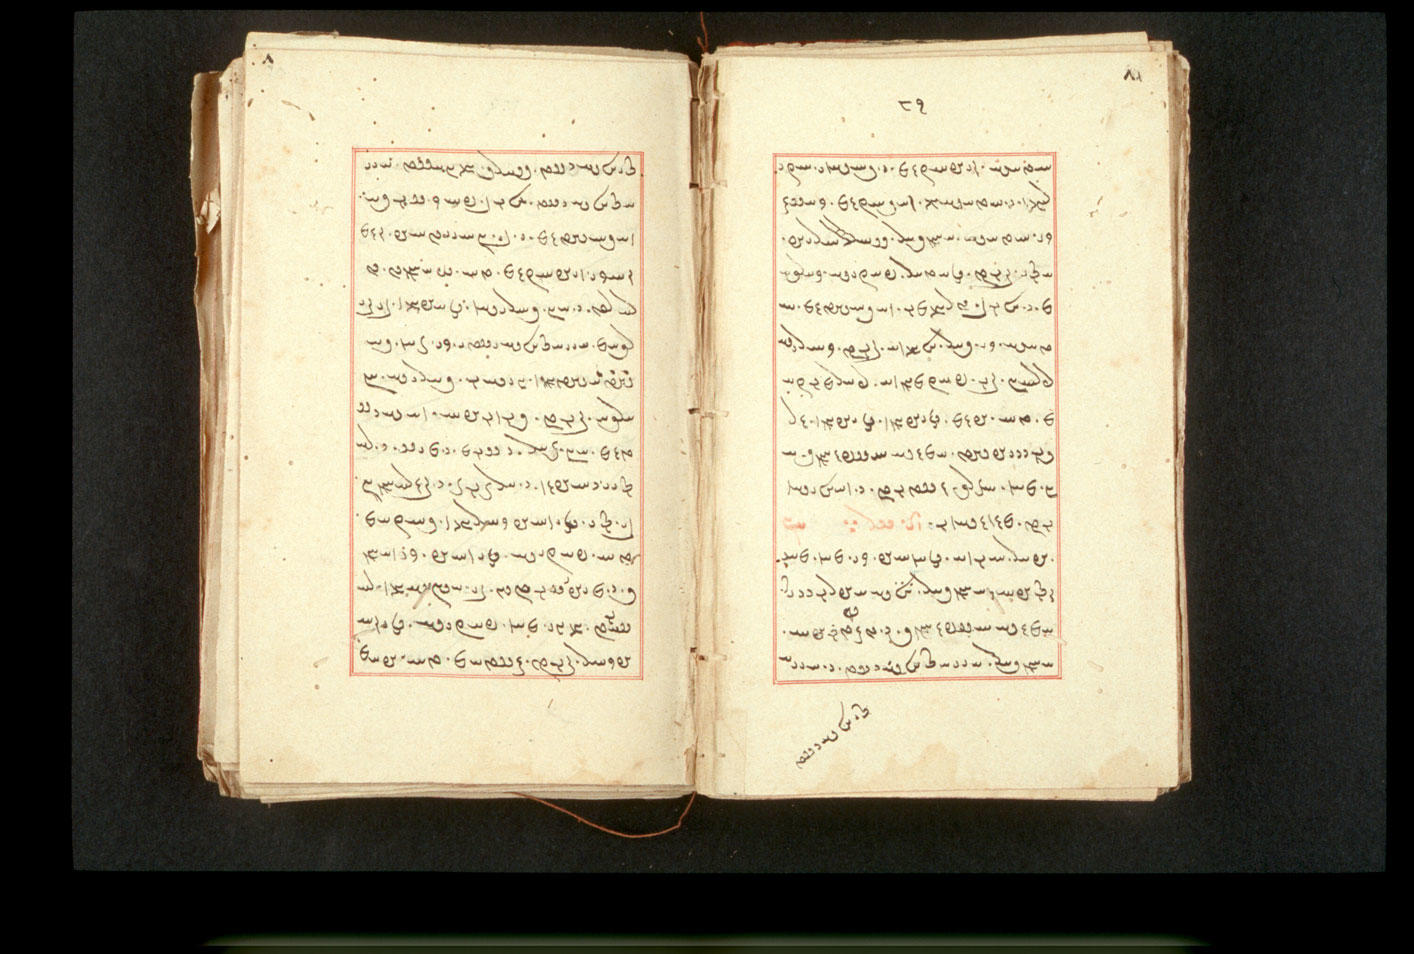 Folios 81v (right) and 82r (left)